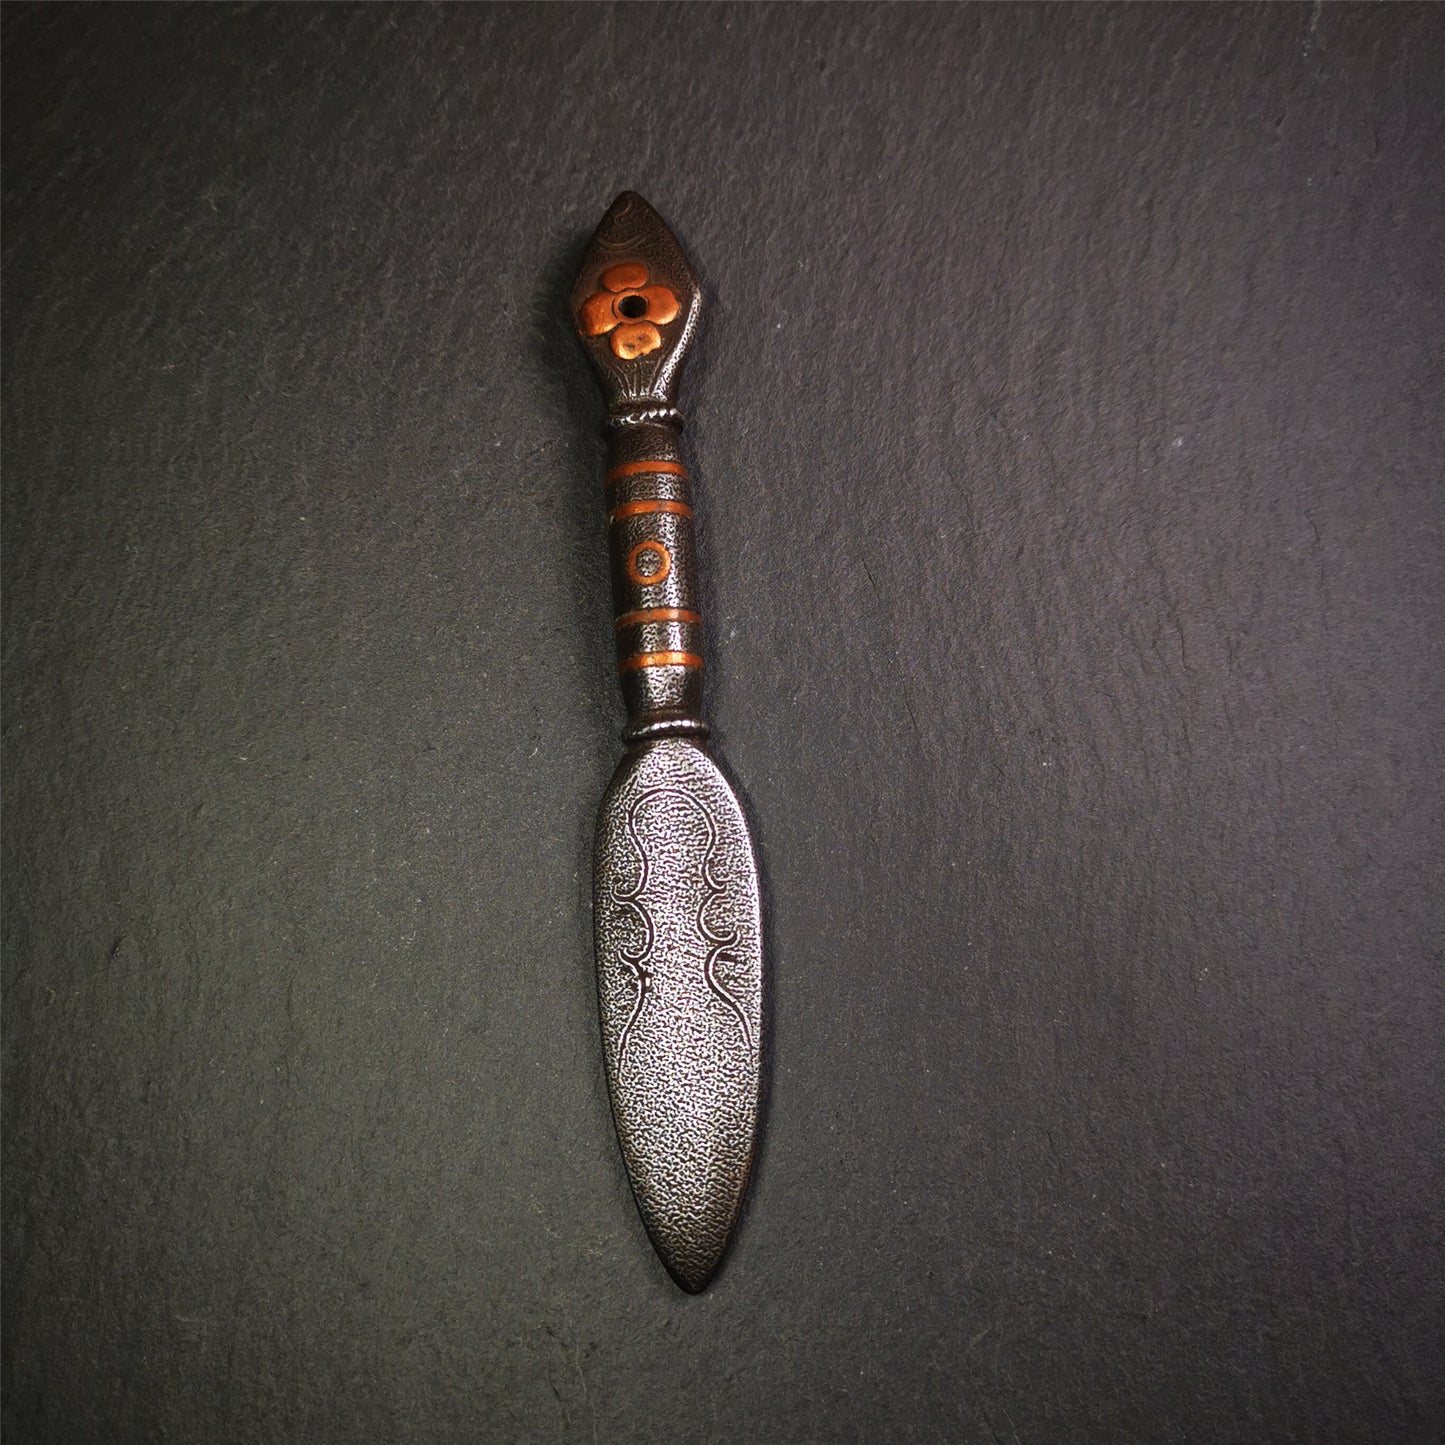 This kila / phurba was handmade by Tibetan craftsmen from Tibet in 2000s.  It's a kila dagger,made of cold iron, carved cloud pattern, inlaid red copper, made into a dzi pattern on handle, and the petals of the tail hanging ring